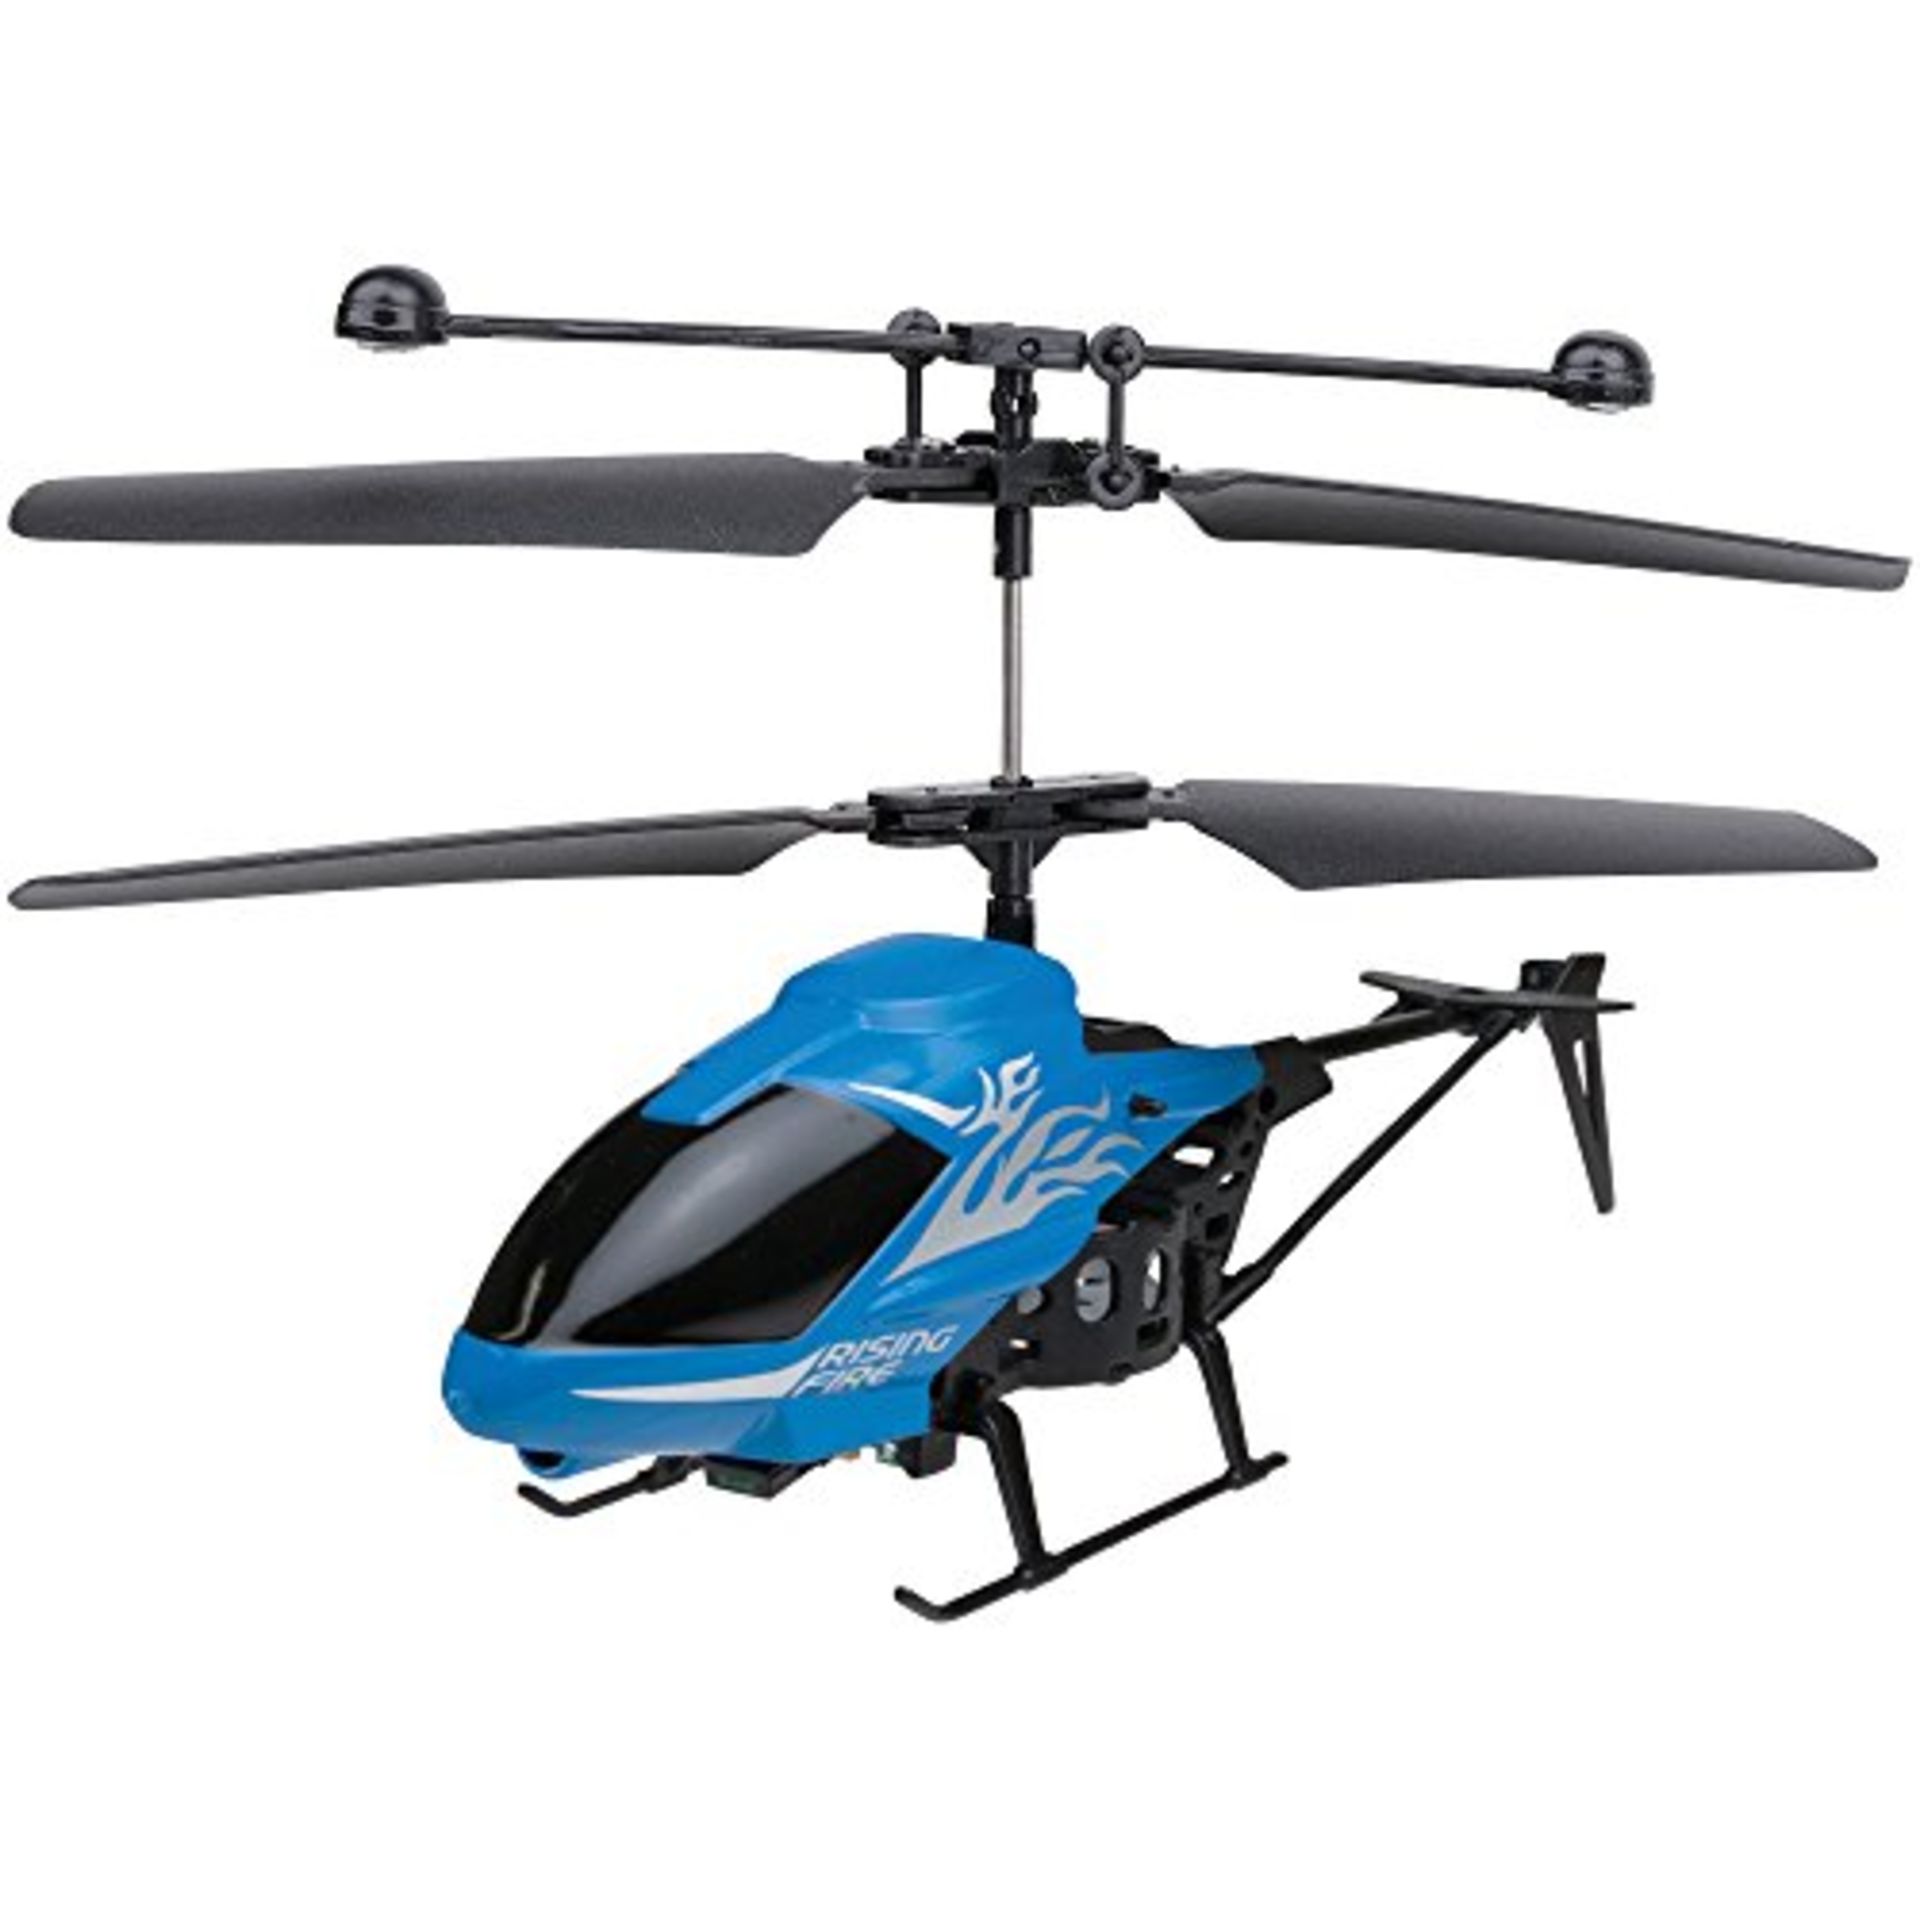 V Brand New Interceptor X-20 Radio Controlled Helicopter Brand New Sealed Complete With Controller X